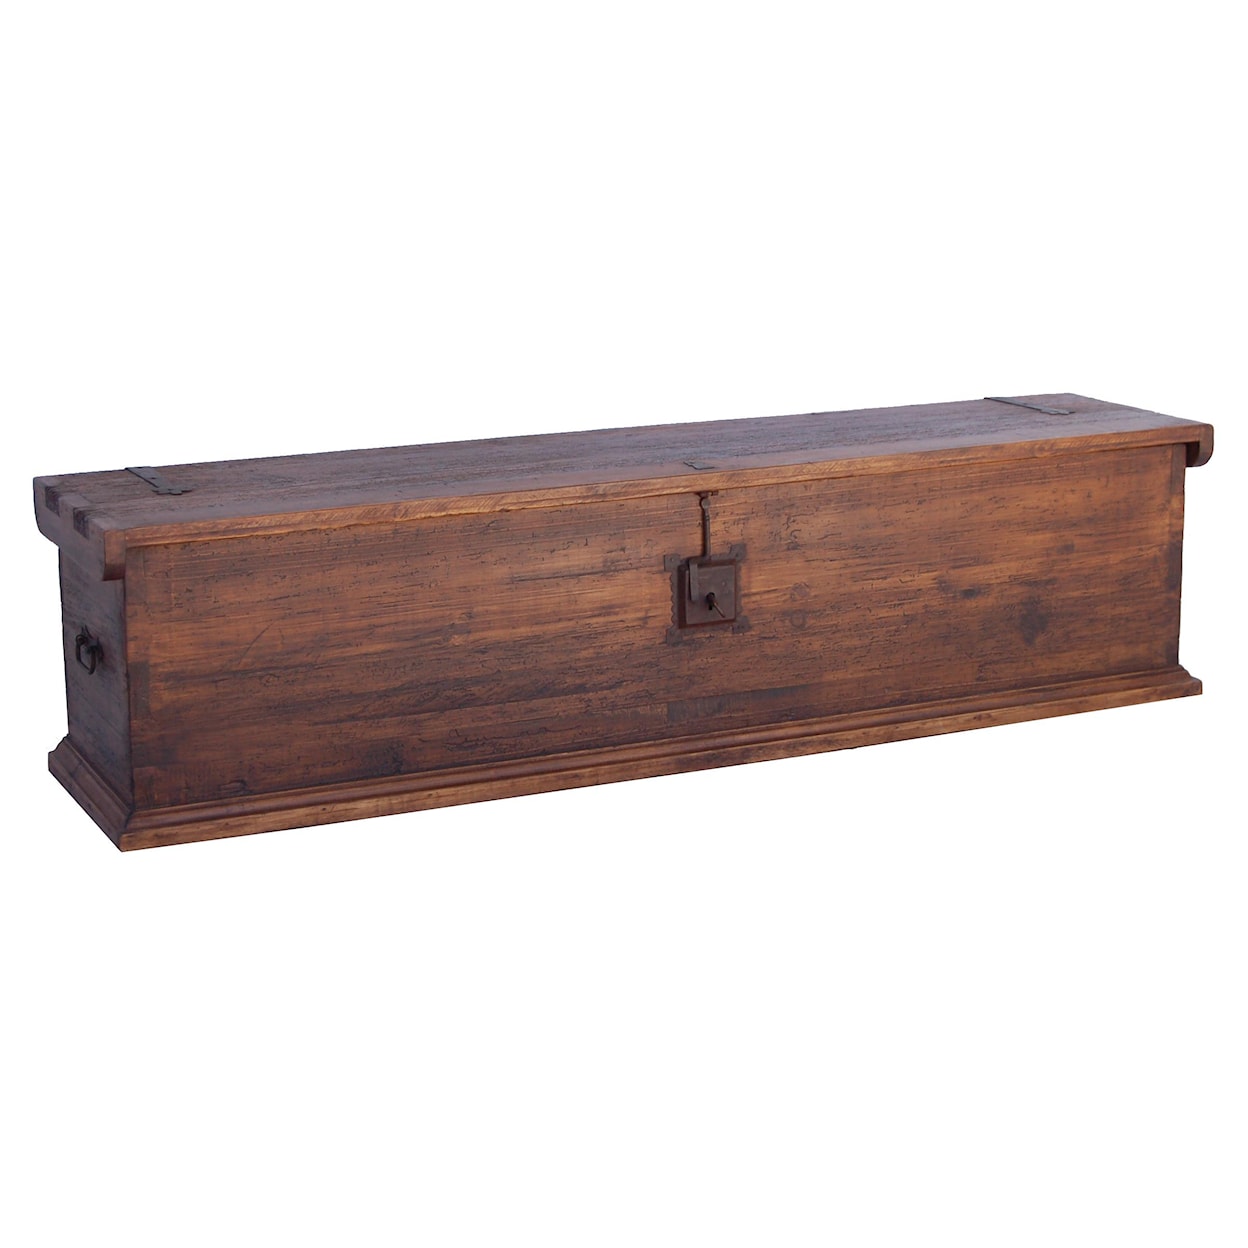 Furniture Source International Occasional Tables Bed Chest